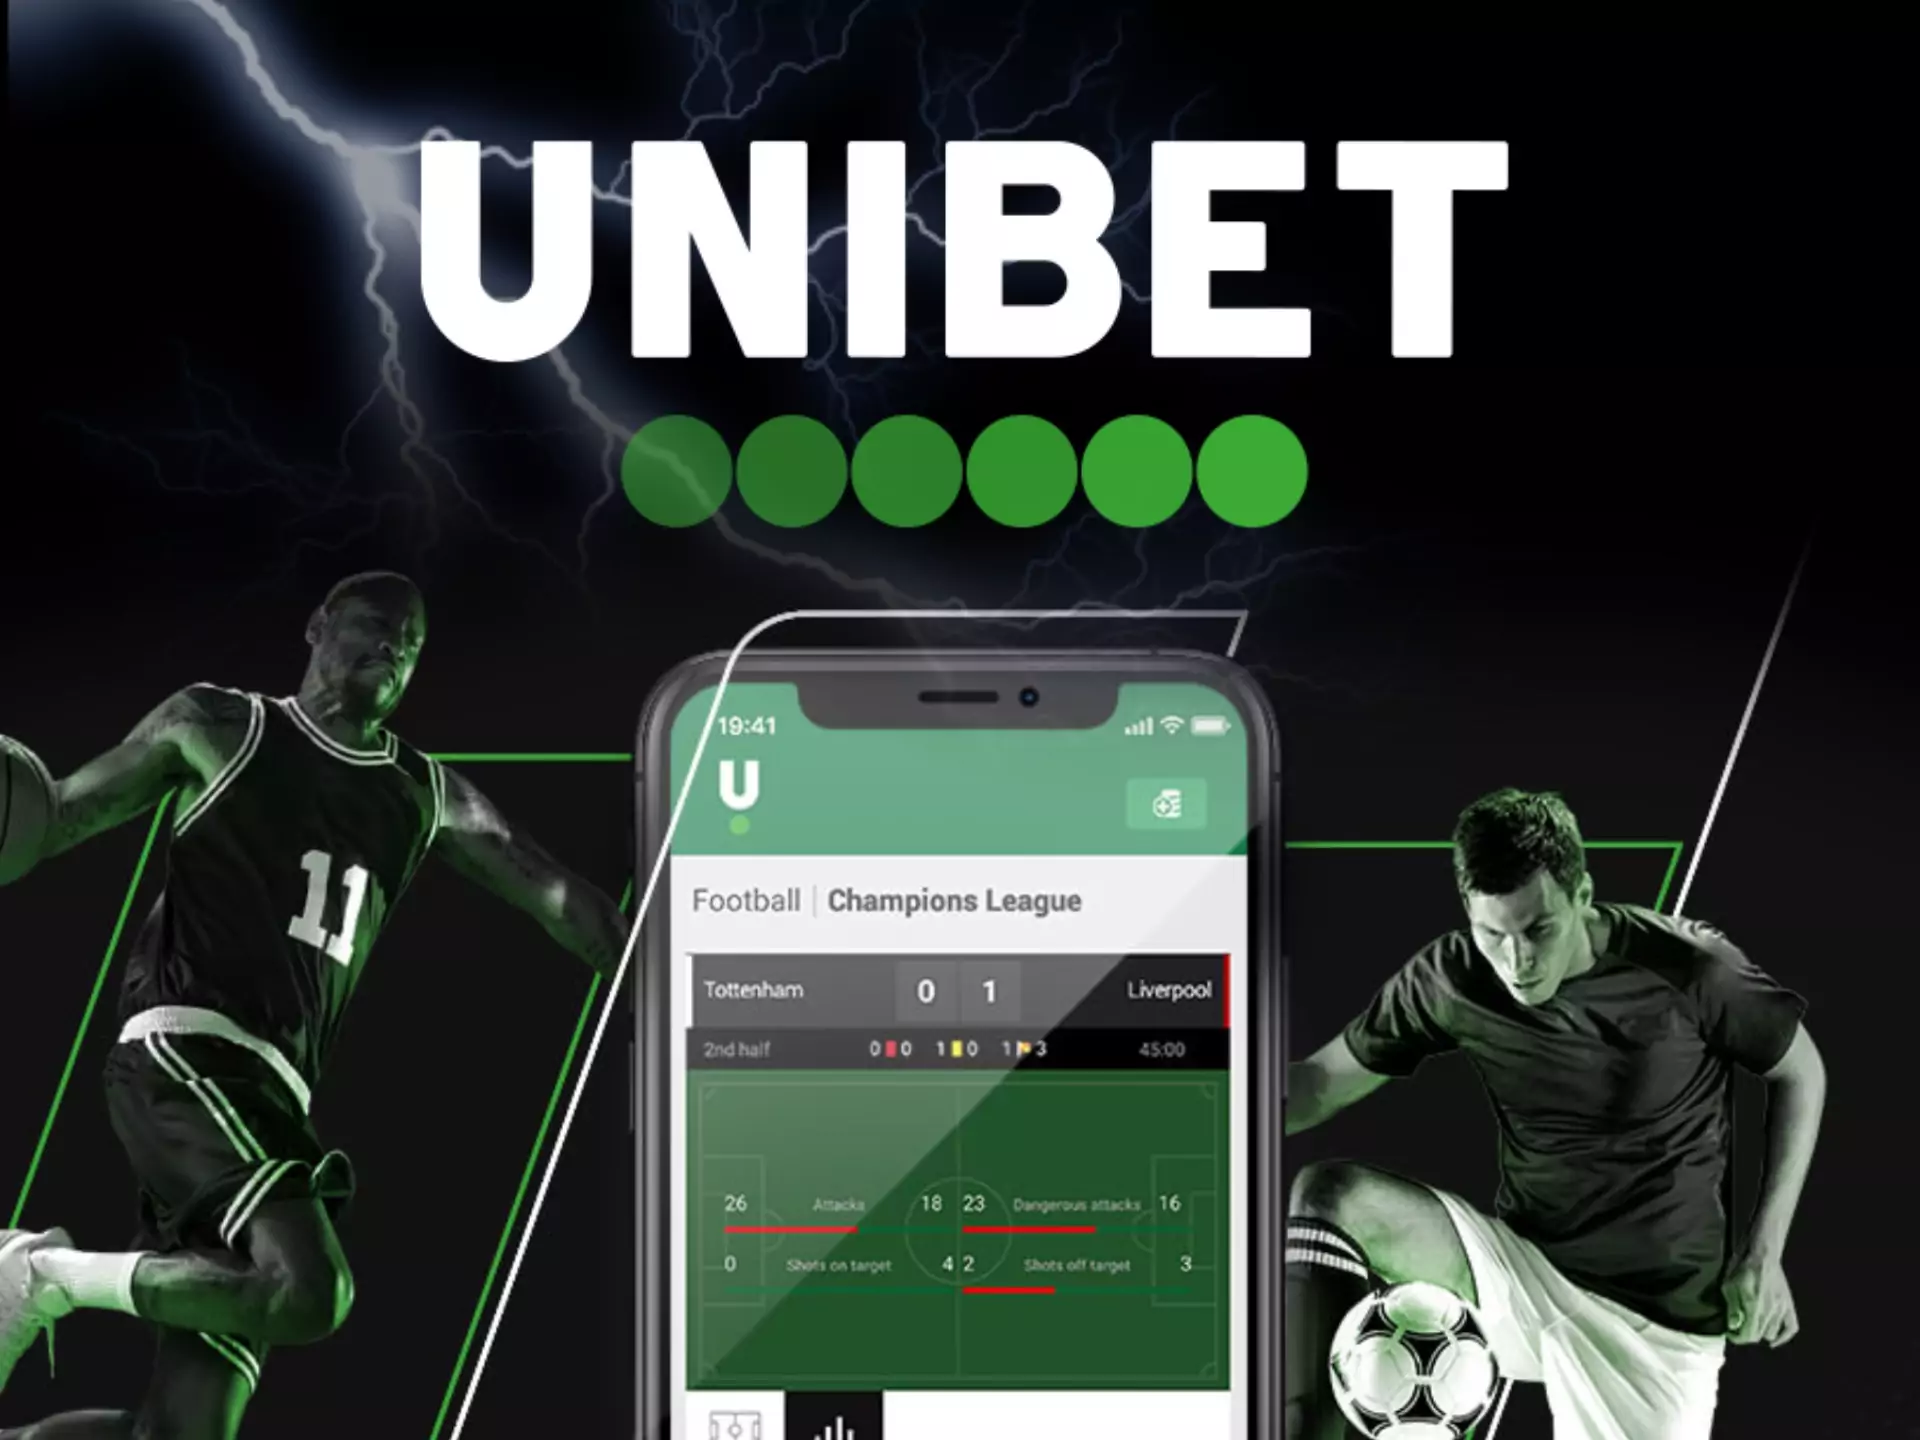 You can download Unibet mobile app from the official website.